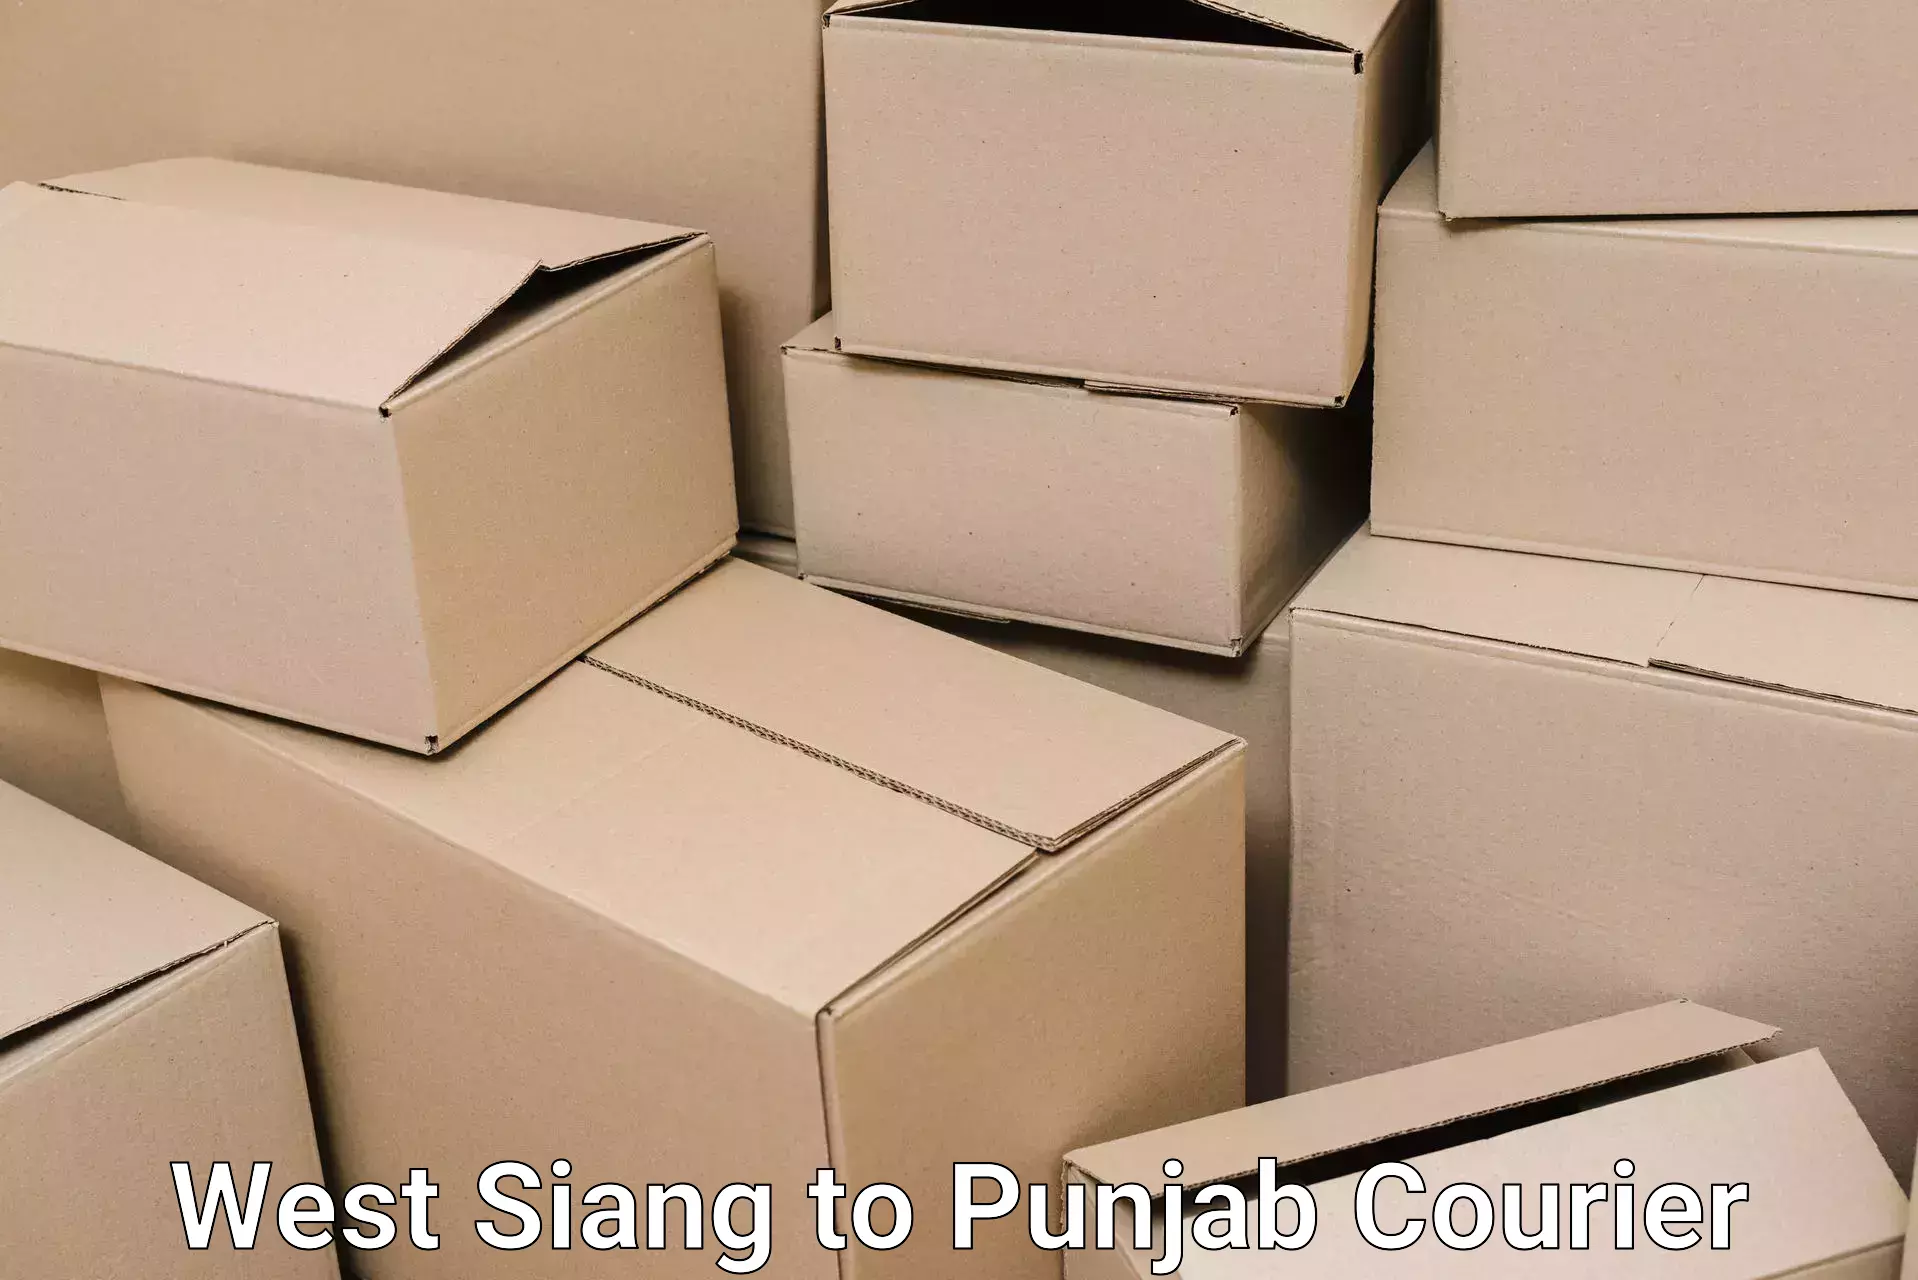 Furniture transport solutions West Siang to Ludhiana